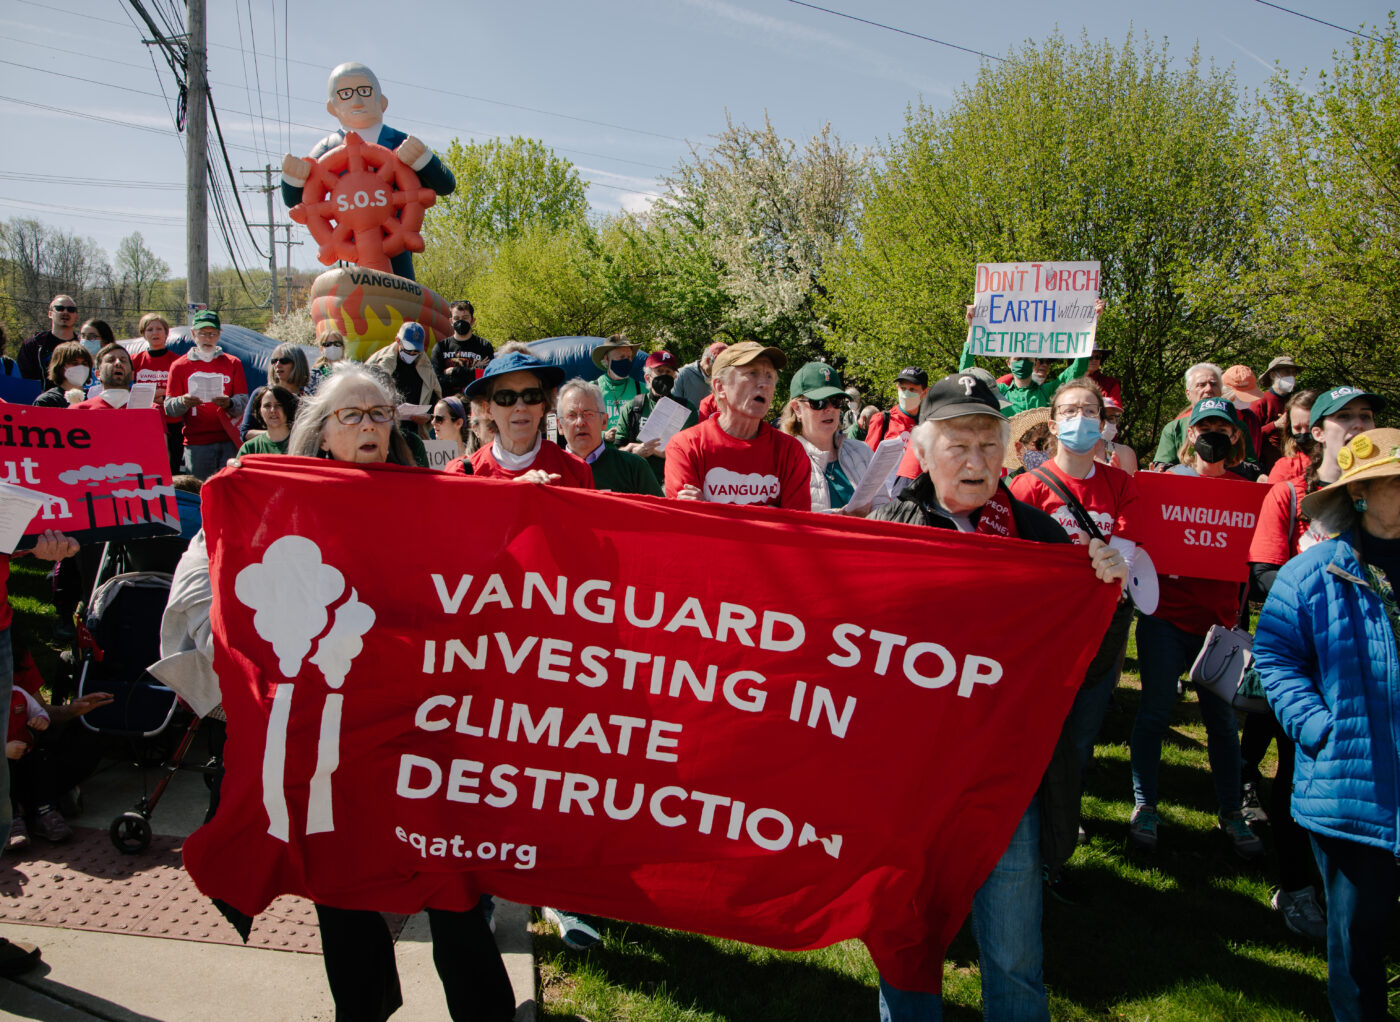 A gathering of 50+ protestors. In the background is an inflatable of Vanguard CEO Tim Buckley in a ship that's wreathed in painted flames, clutching a red steering wheel with S.O.S. on the front. At the front, two elderly protestors hold a red banner that reads “Vanguard stop investing in climate destruction” with an illustration of two smokestacks on the left. Other protestors hold signs reading "It's time to cut carbon" and "Vanguard S.O.S.” and “Don’t torch Earth for your retirement.”